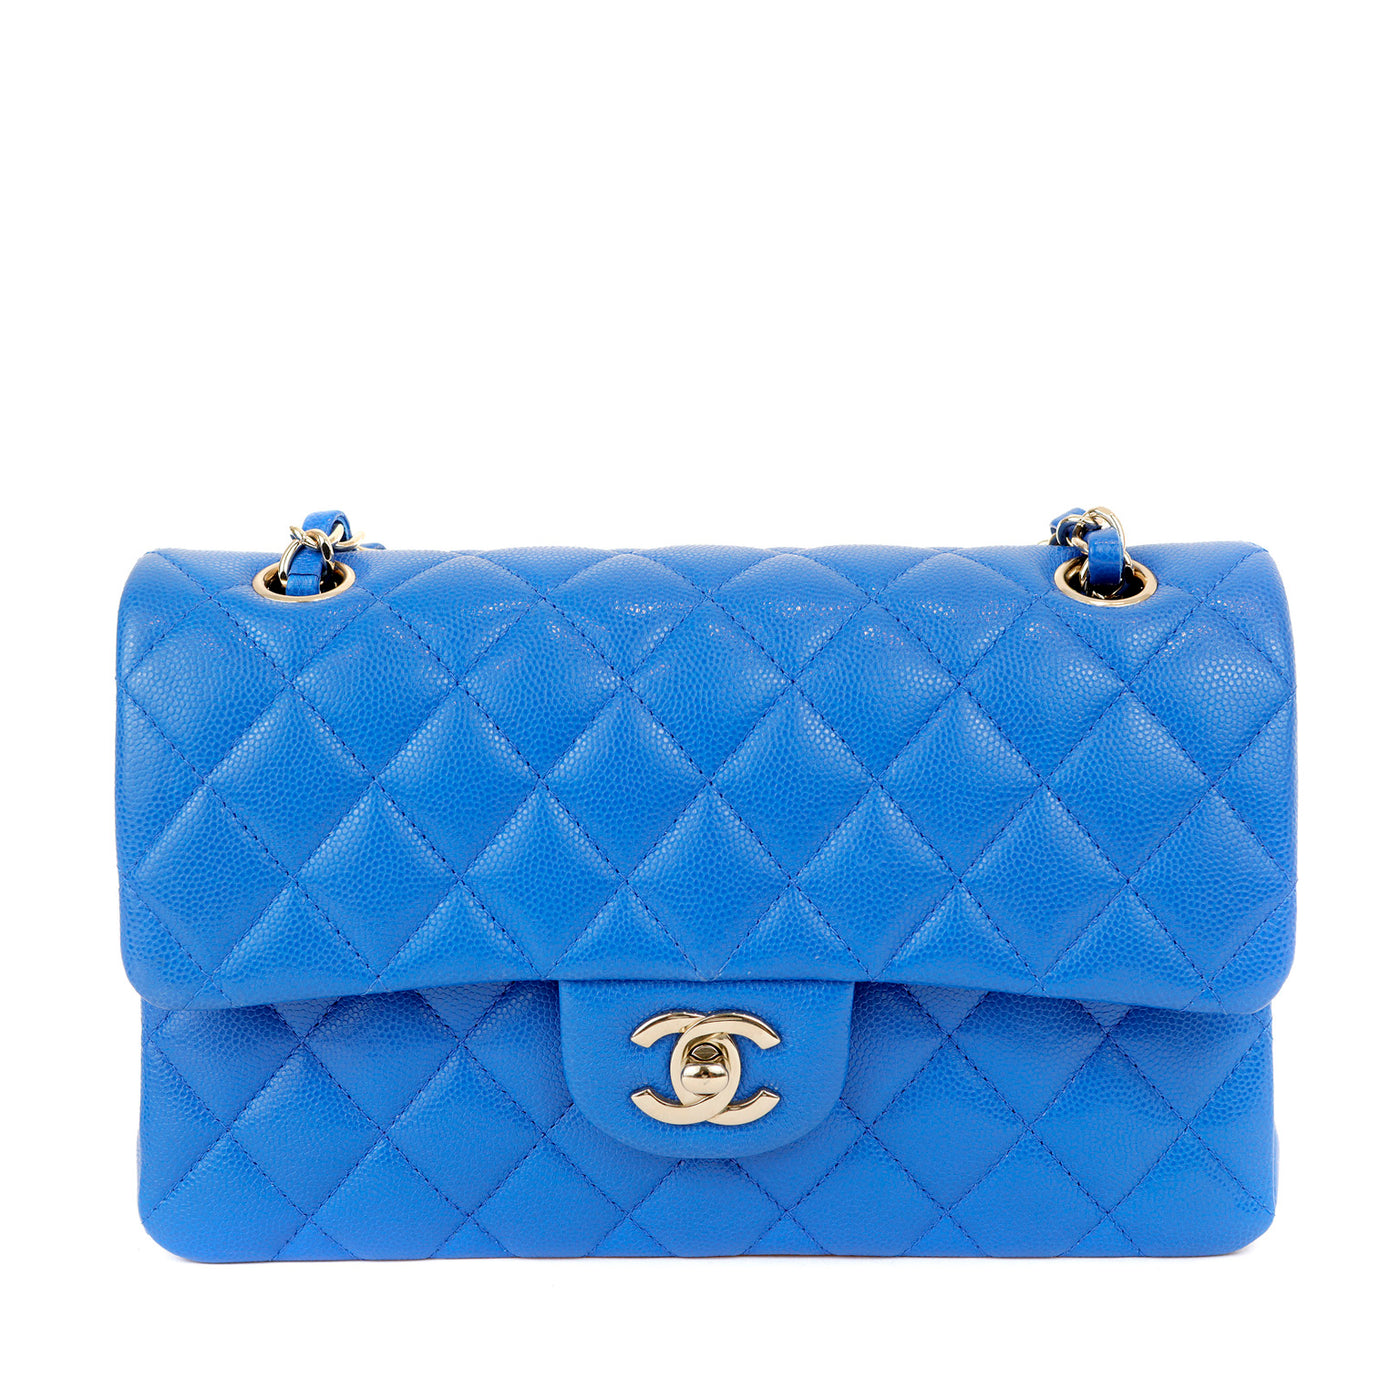 Get your hands on the electrifying Chanel Electric Blue Caviar Small/Medium Classic Flap Bag